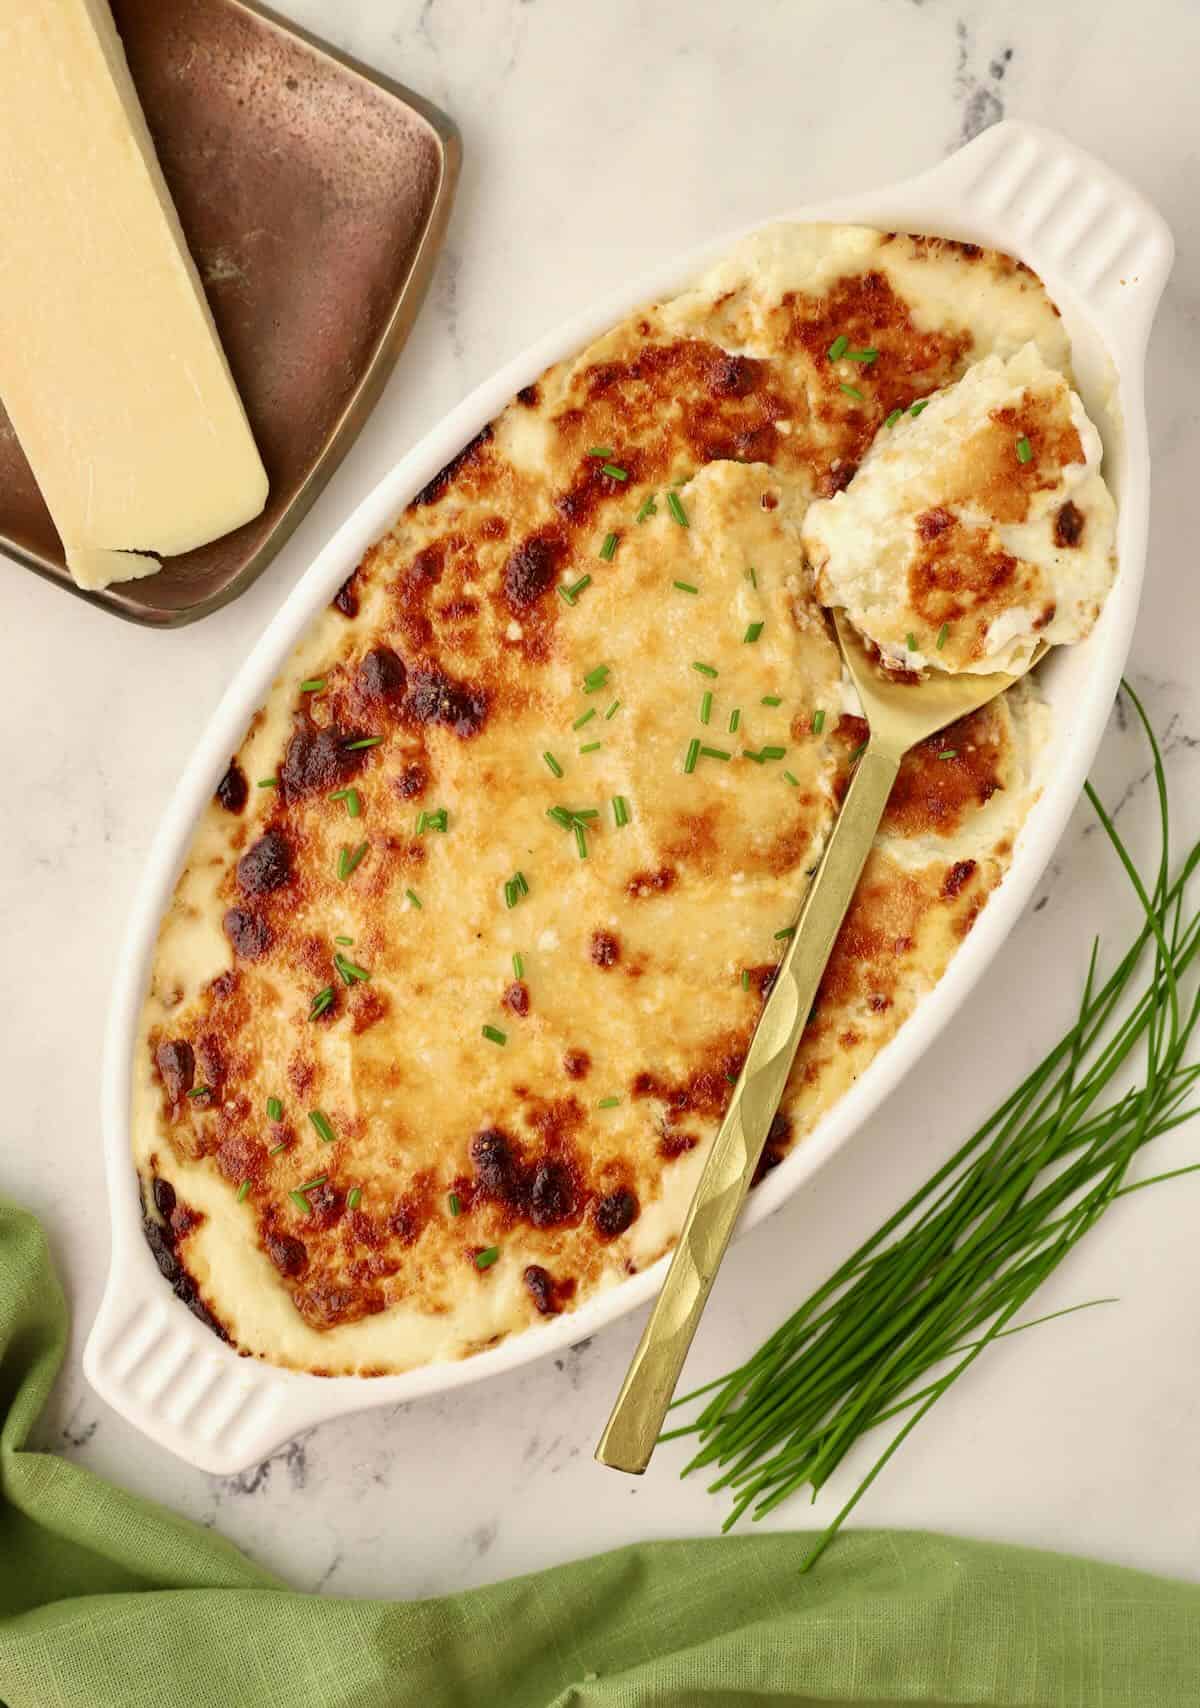 Oven-baked Potatoes Au Gratin in a white gratin dish with a gold spoon.